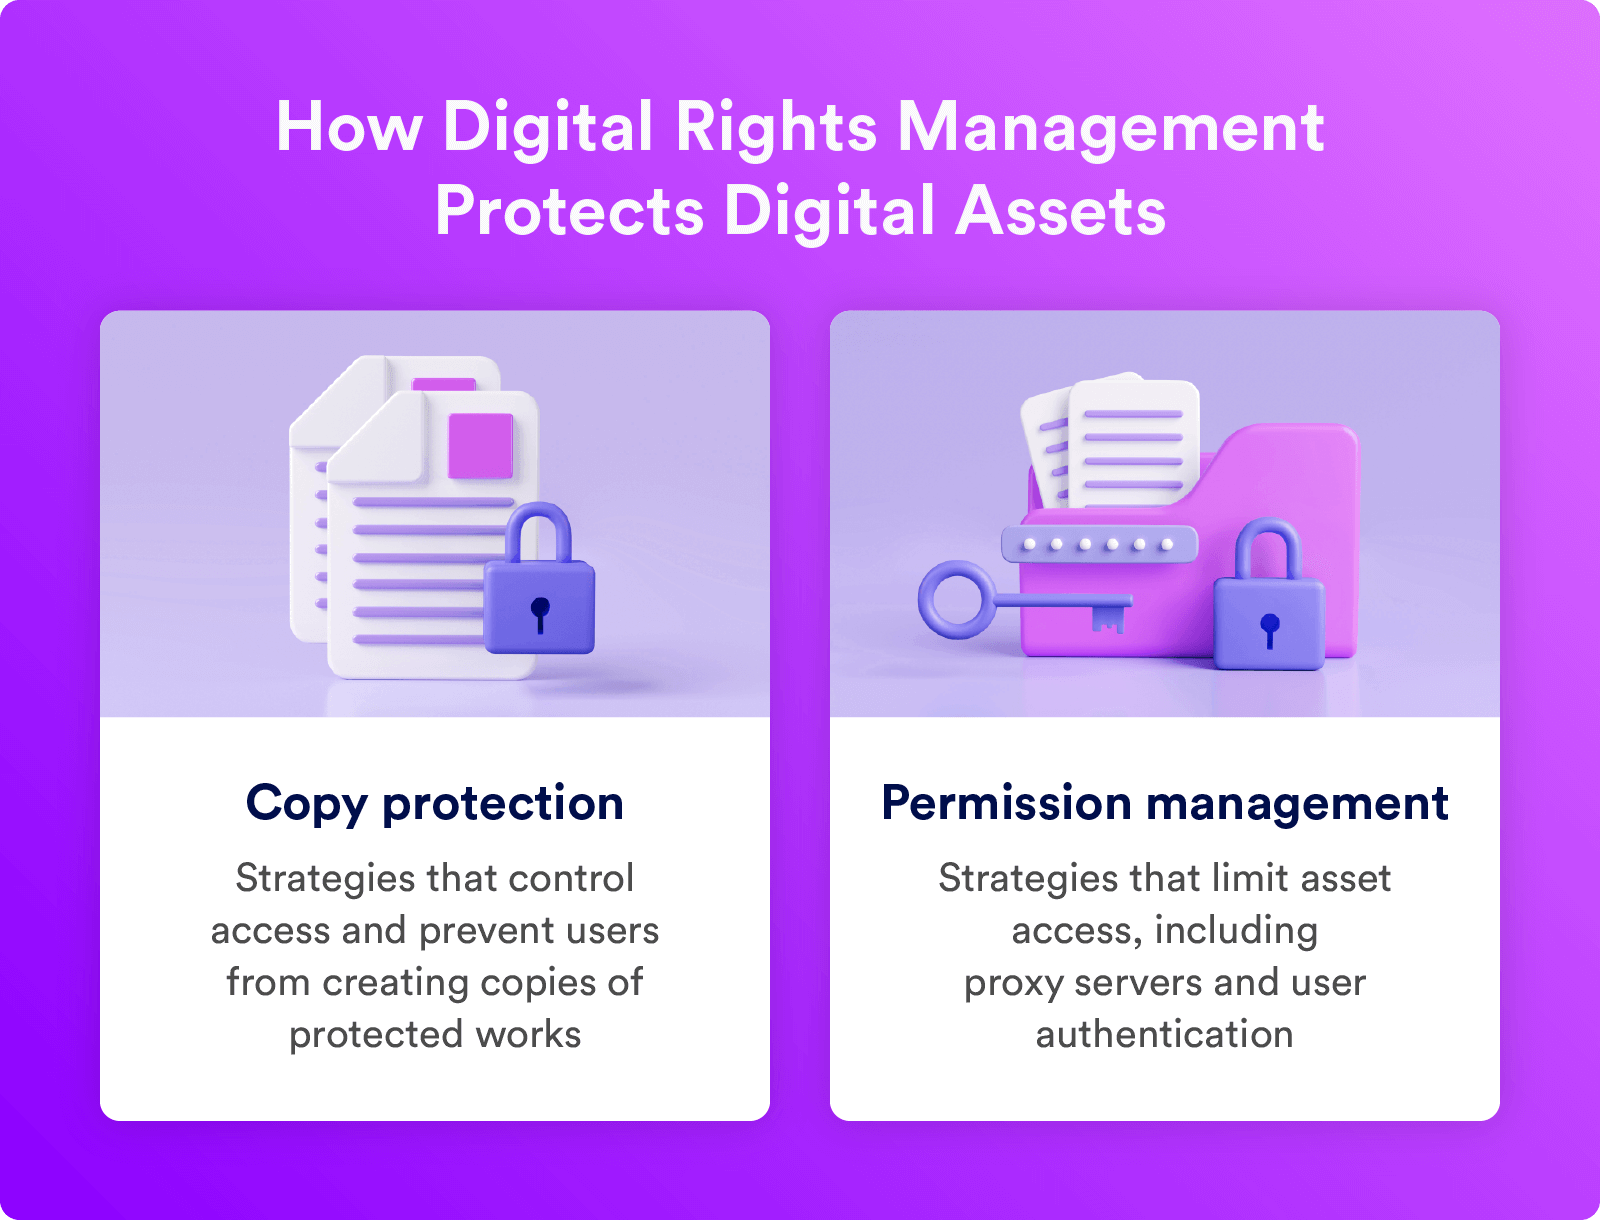 Digital rights management works by using copy protection and permission management.